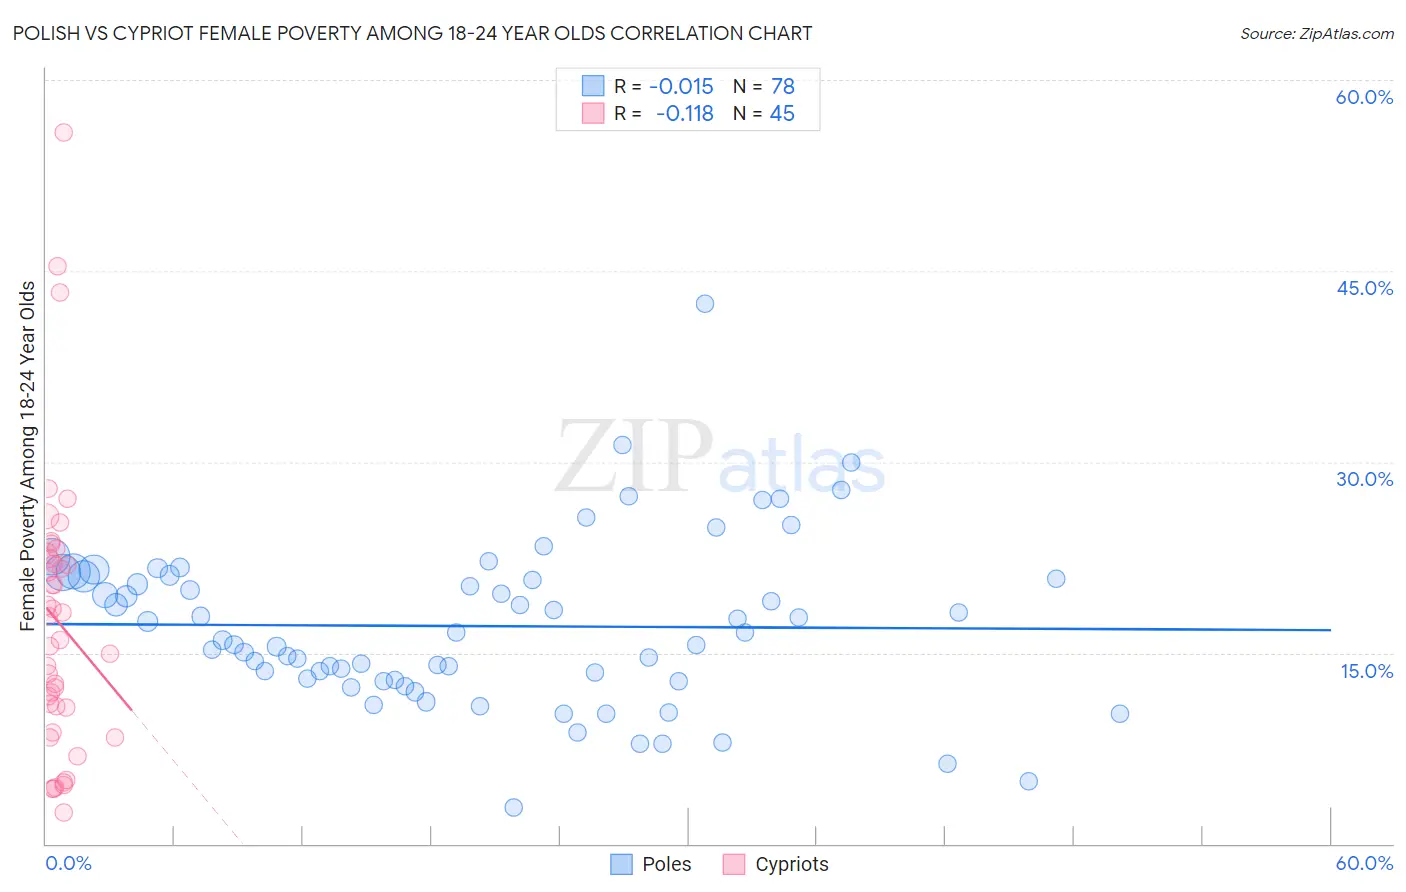 Polish vs Cypriot Female Poverty Among 18-24 Year Olds